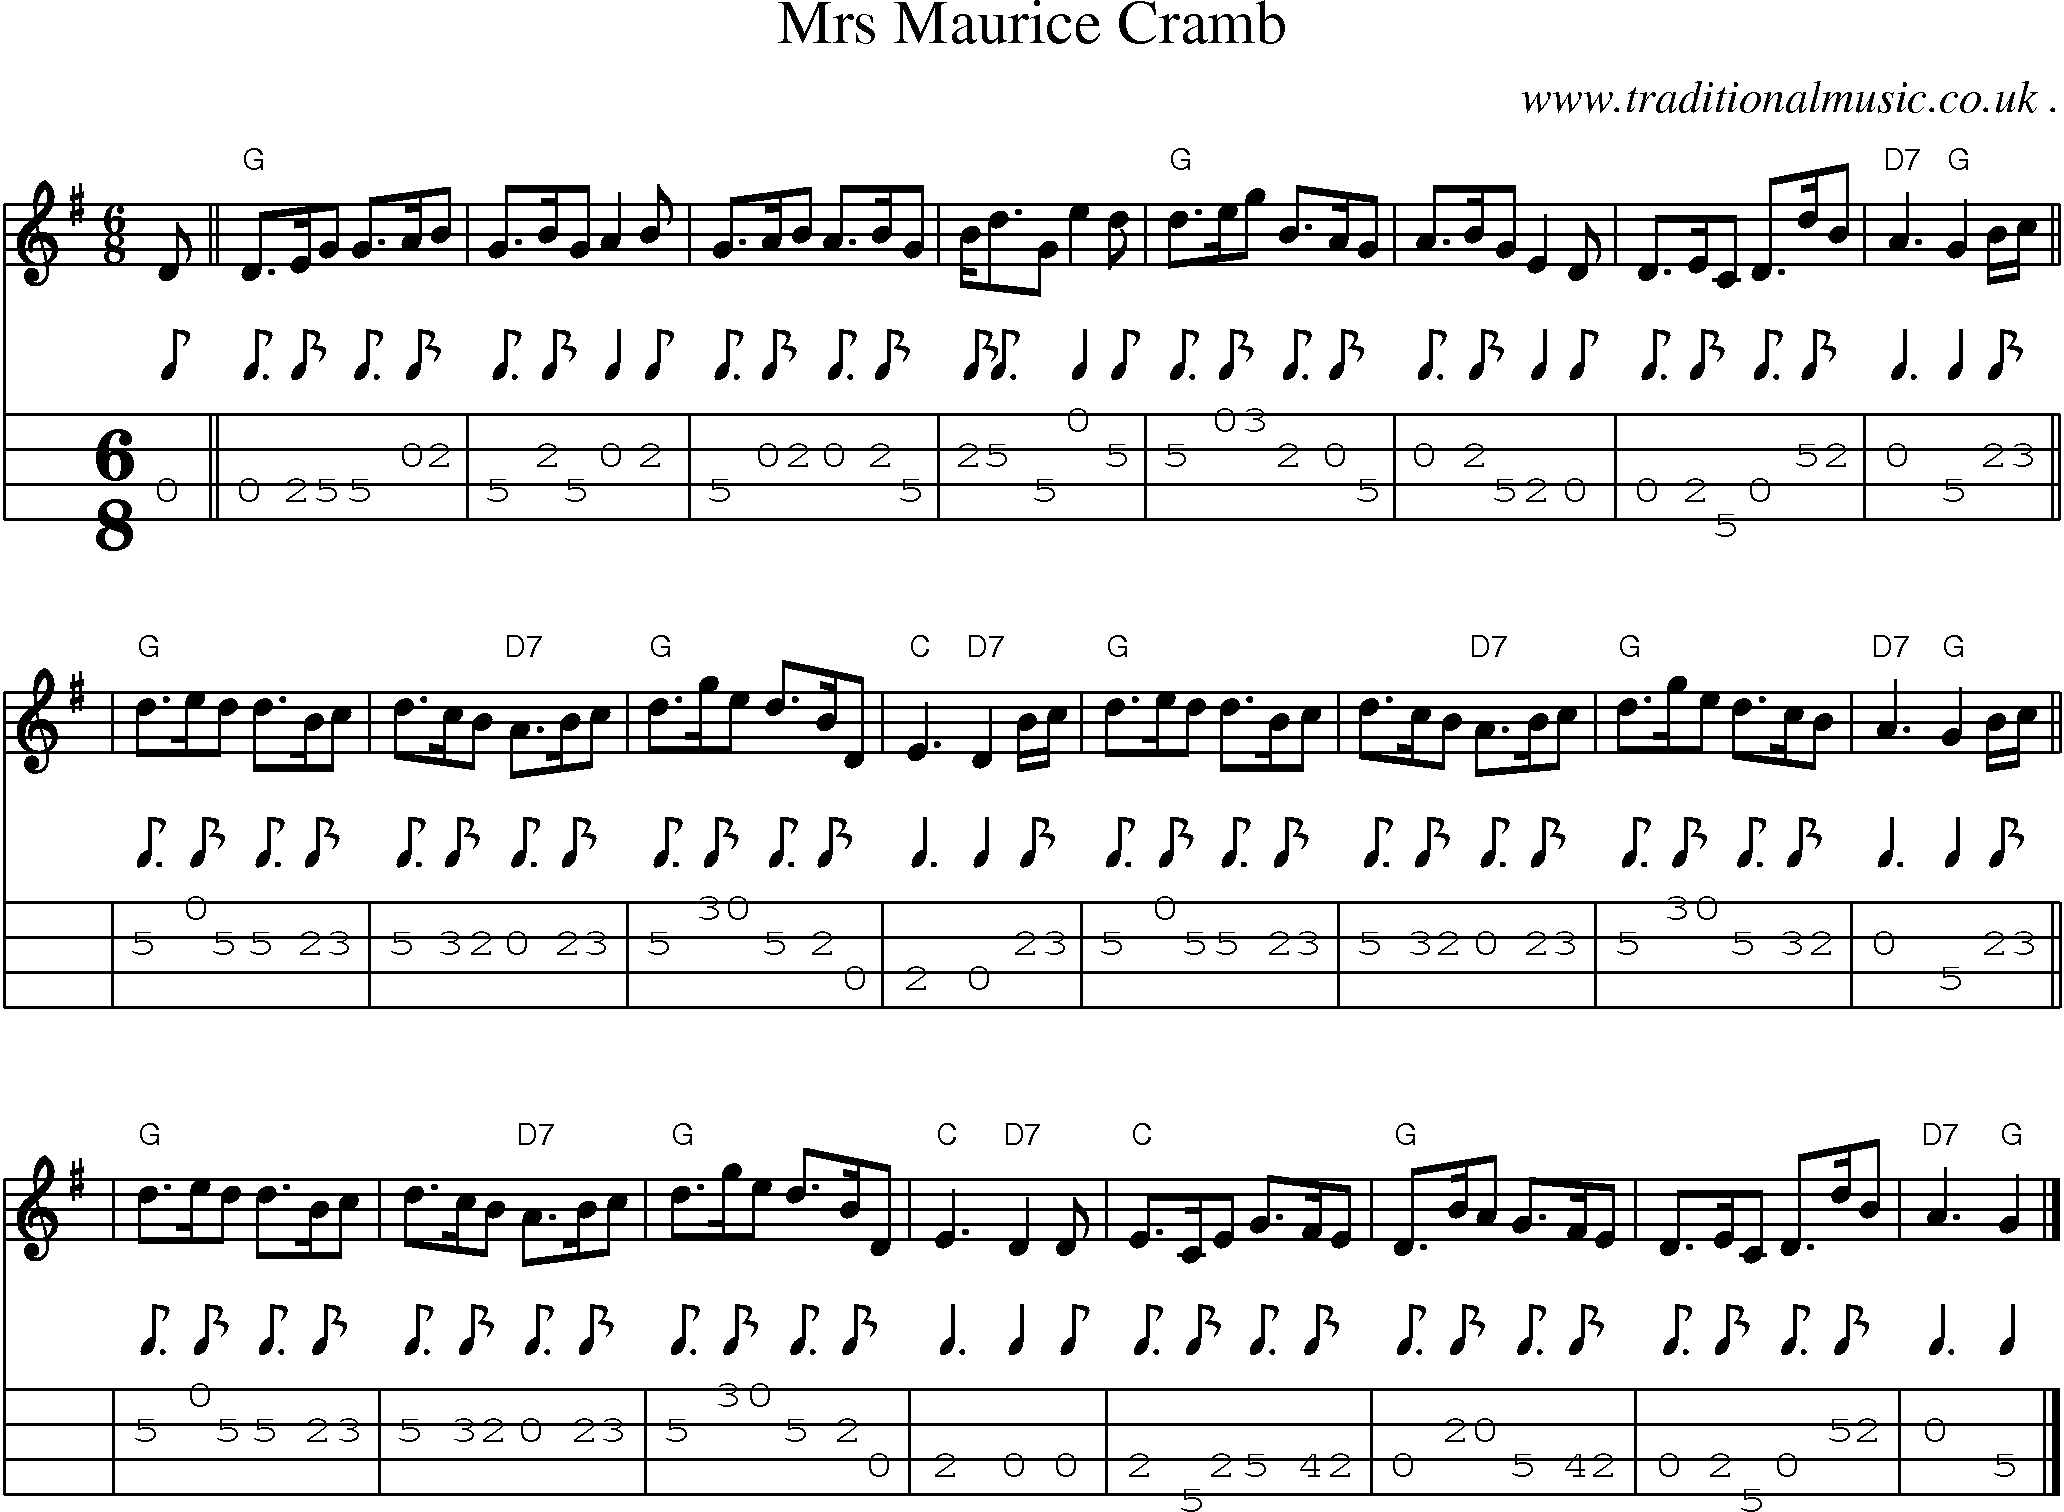 Sheet-music  score, Chords and Mandolin Tabs for Mrs Maurice Cramb